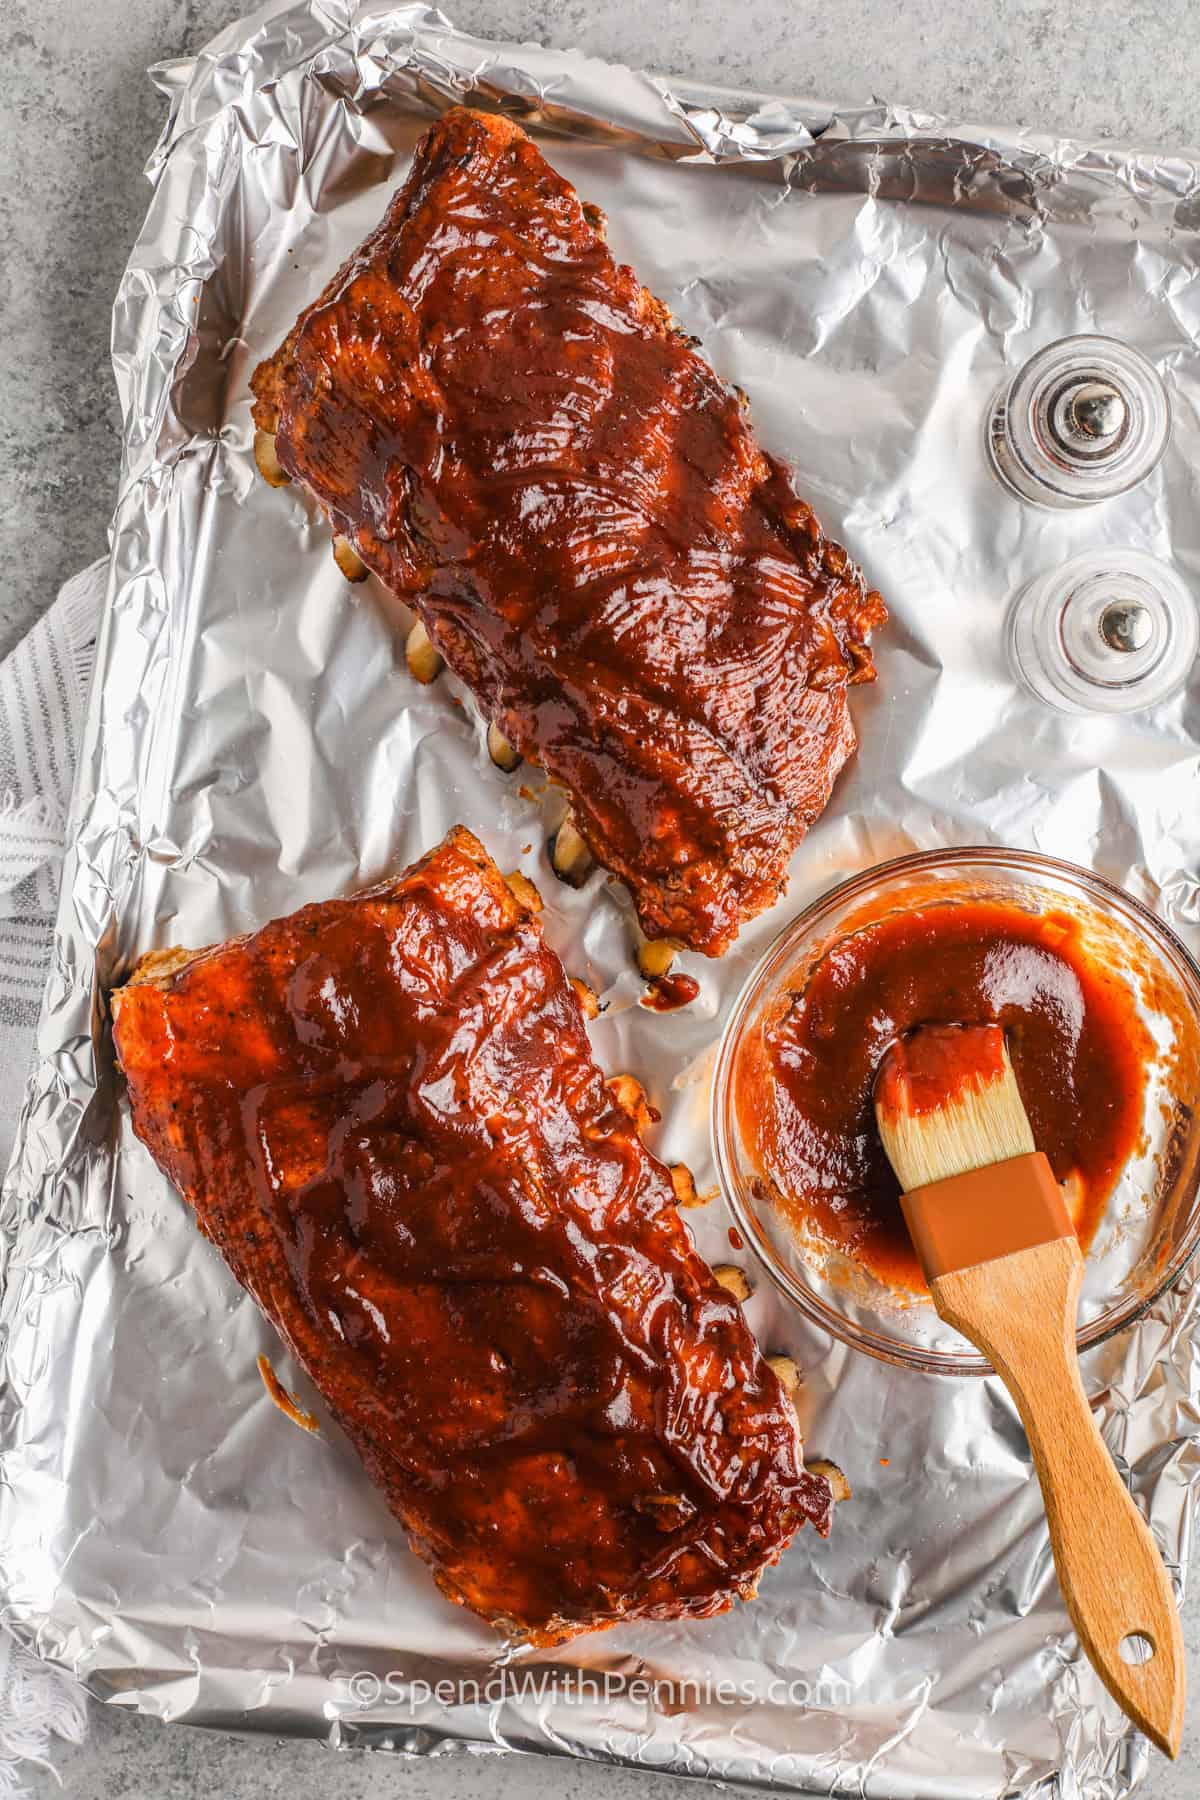 adding sauce to ribs to make Oven Baked Ribs